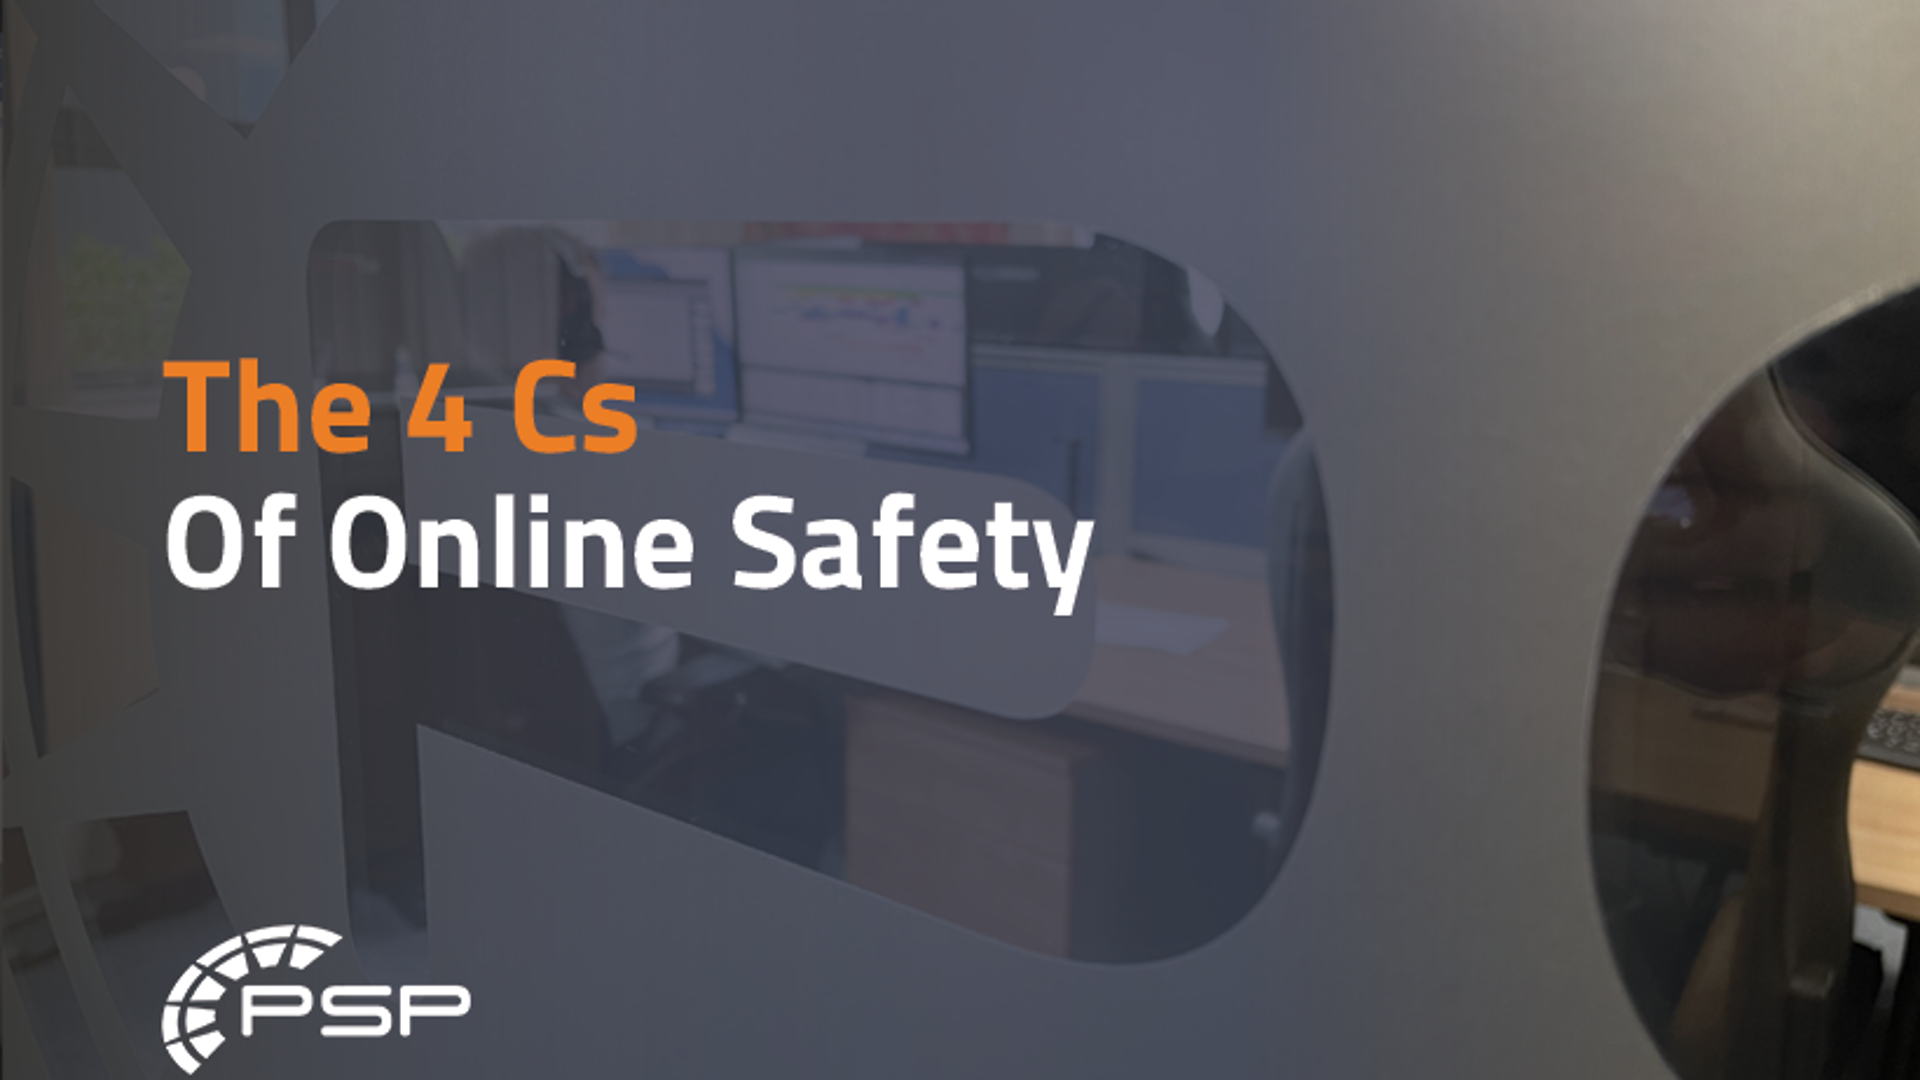 The 4 Cs of online safety